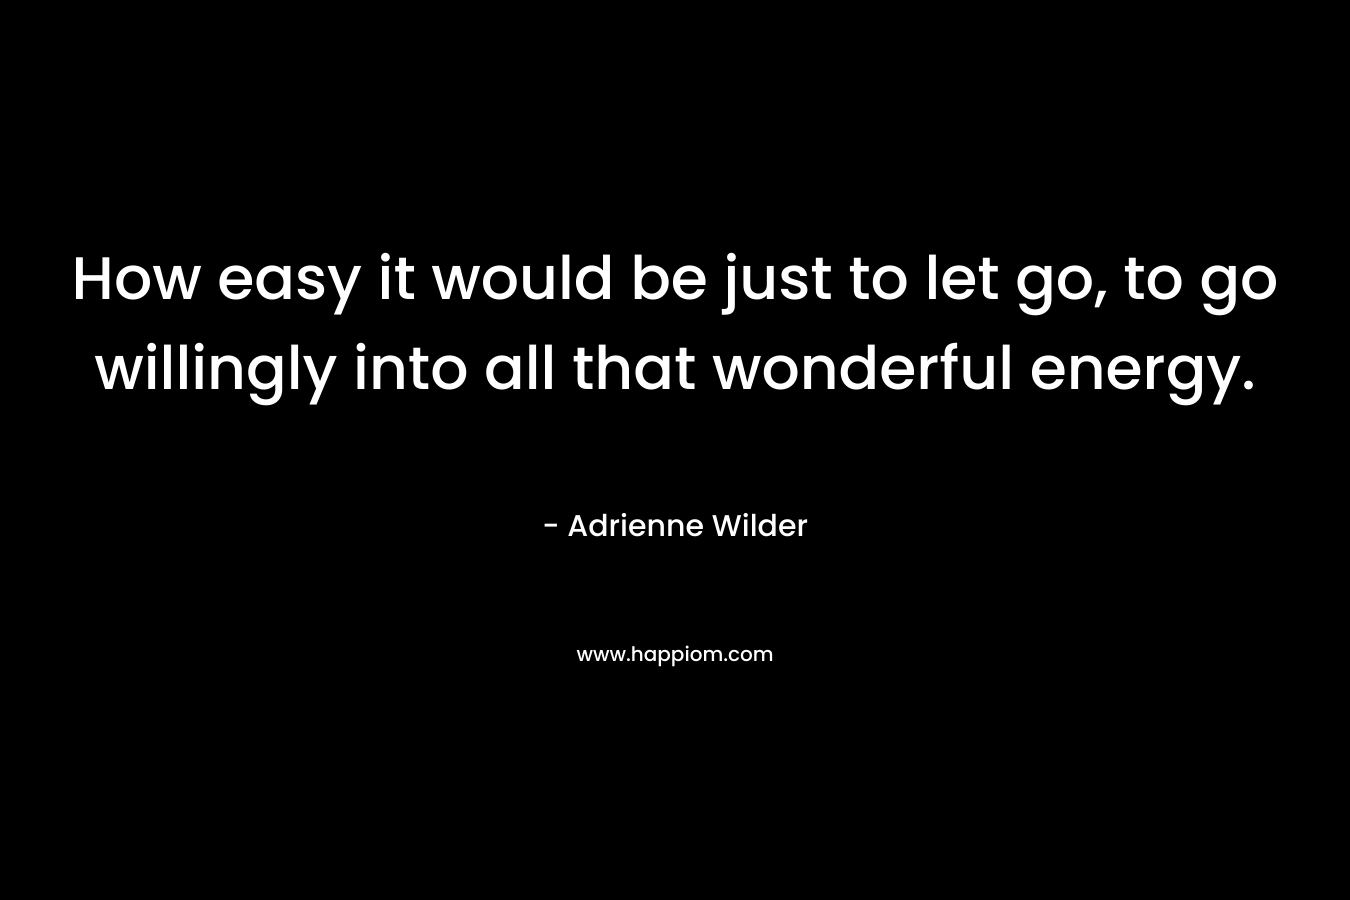 How easy it would be just to let go, to go willingly into all that wonderful energy. – Adrienne Wilder